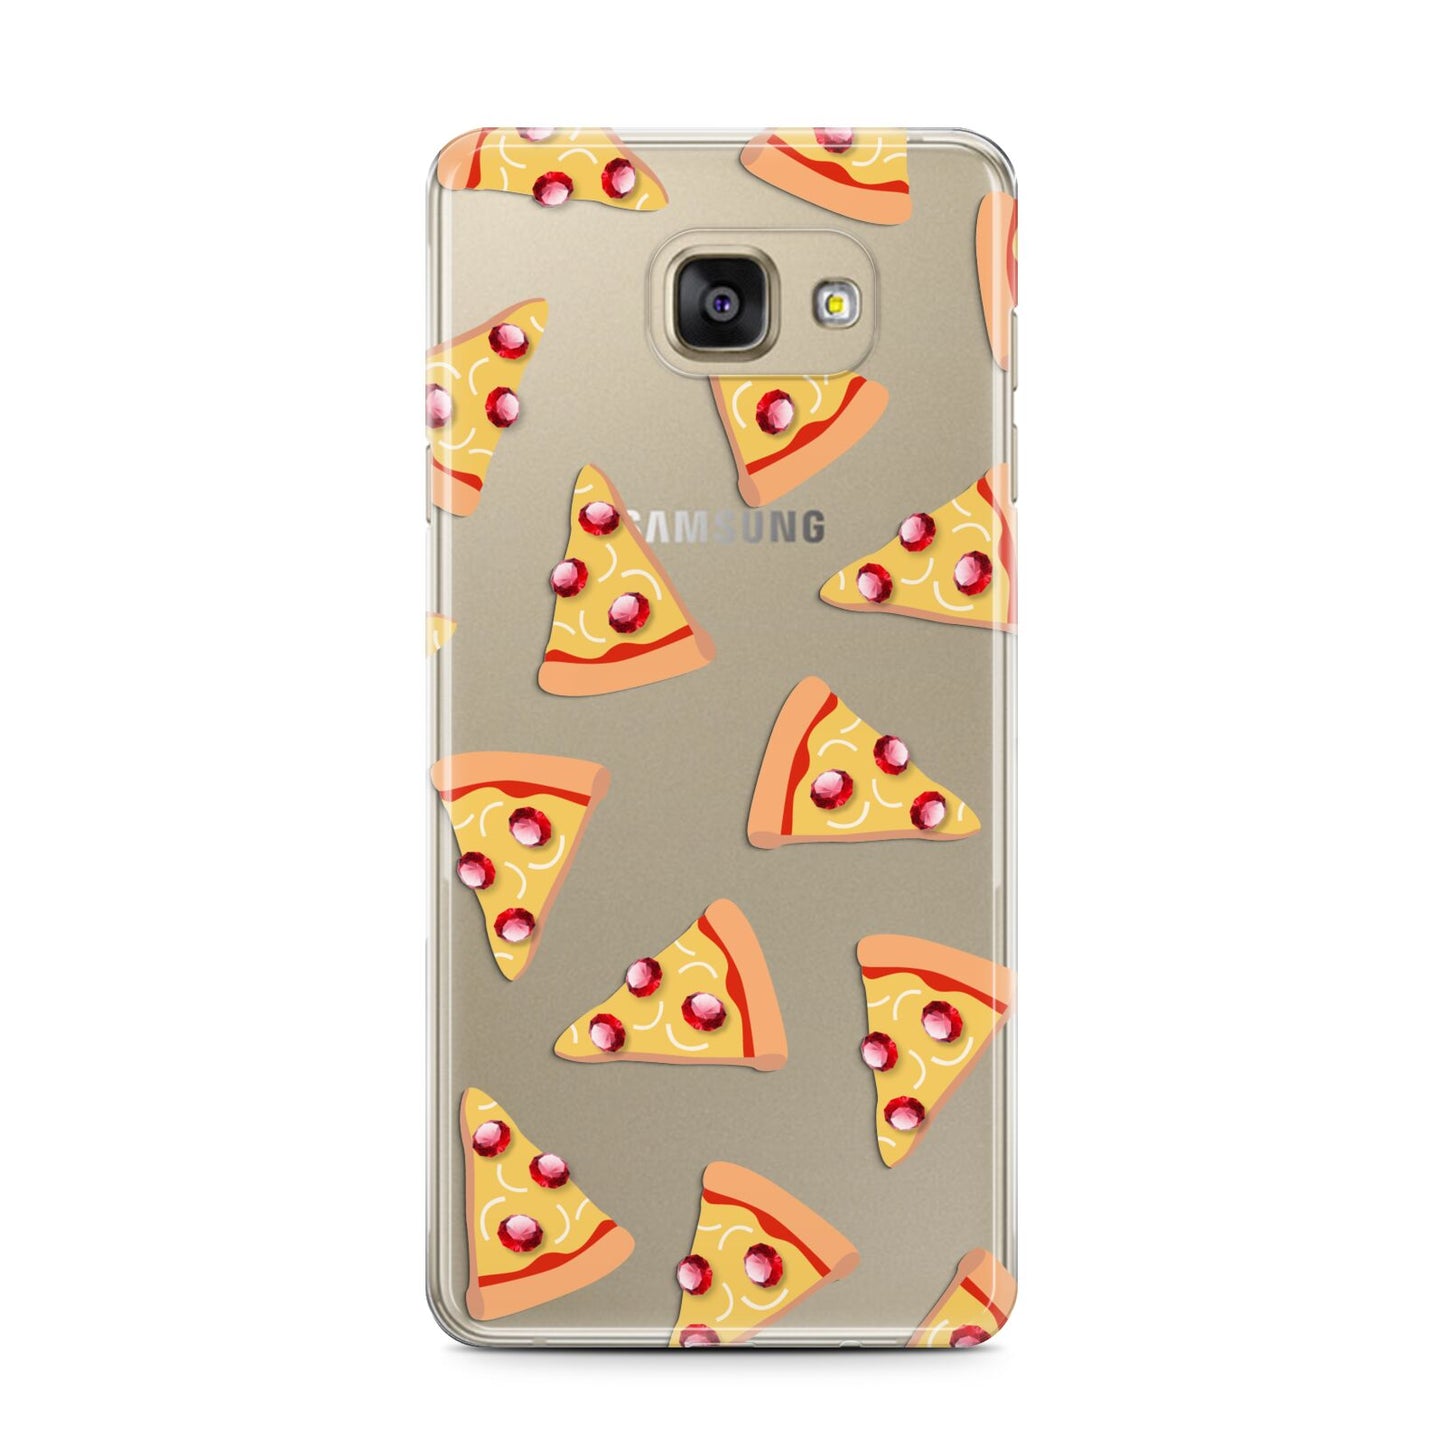 Rubies on Cartoon Pizza Slices Samsung Galaxy A7 2016 Case on gold phone